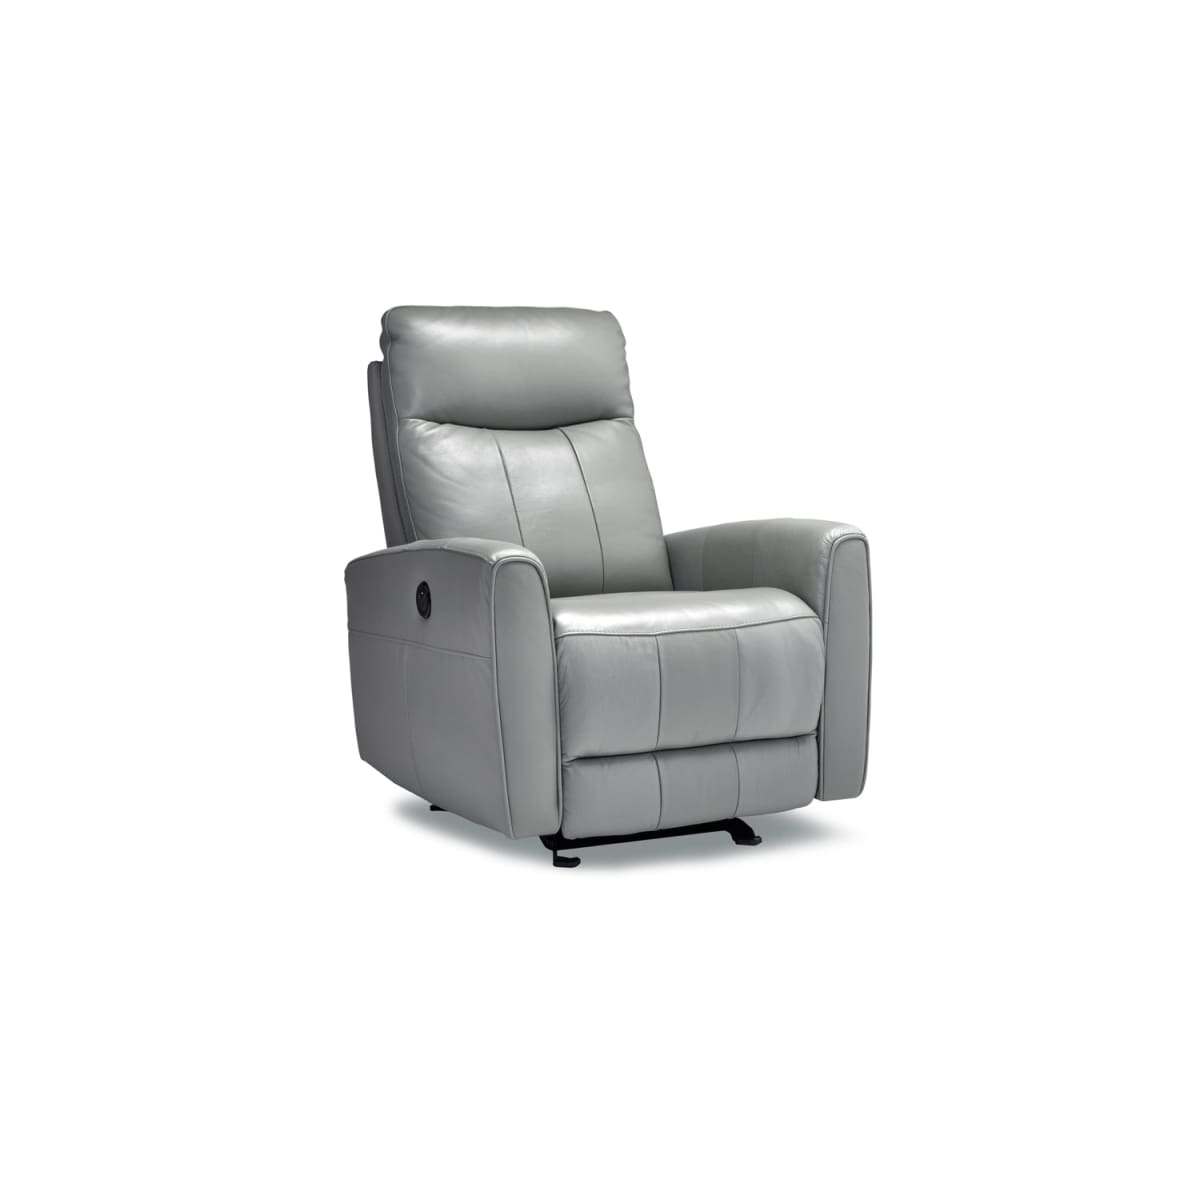 Paris Power Recliner Leather Chair. - accent chairs